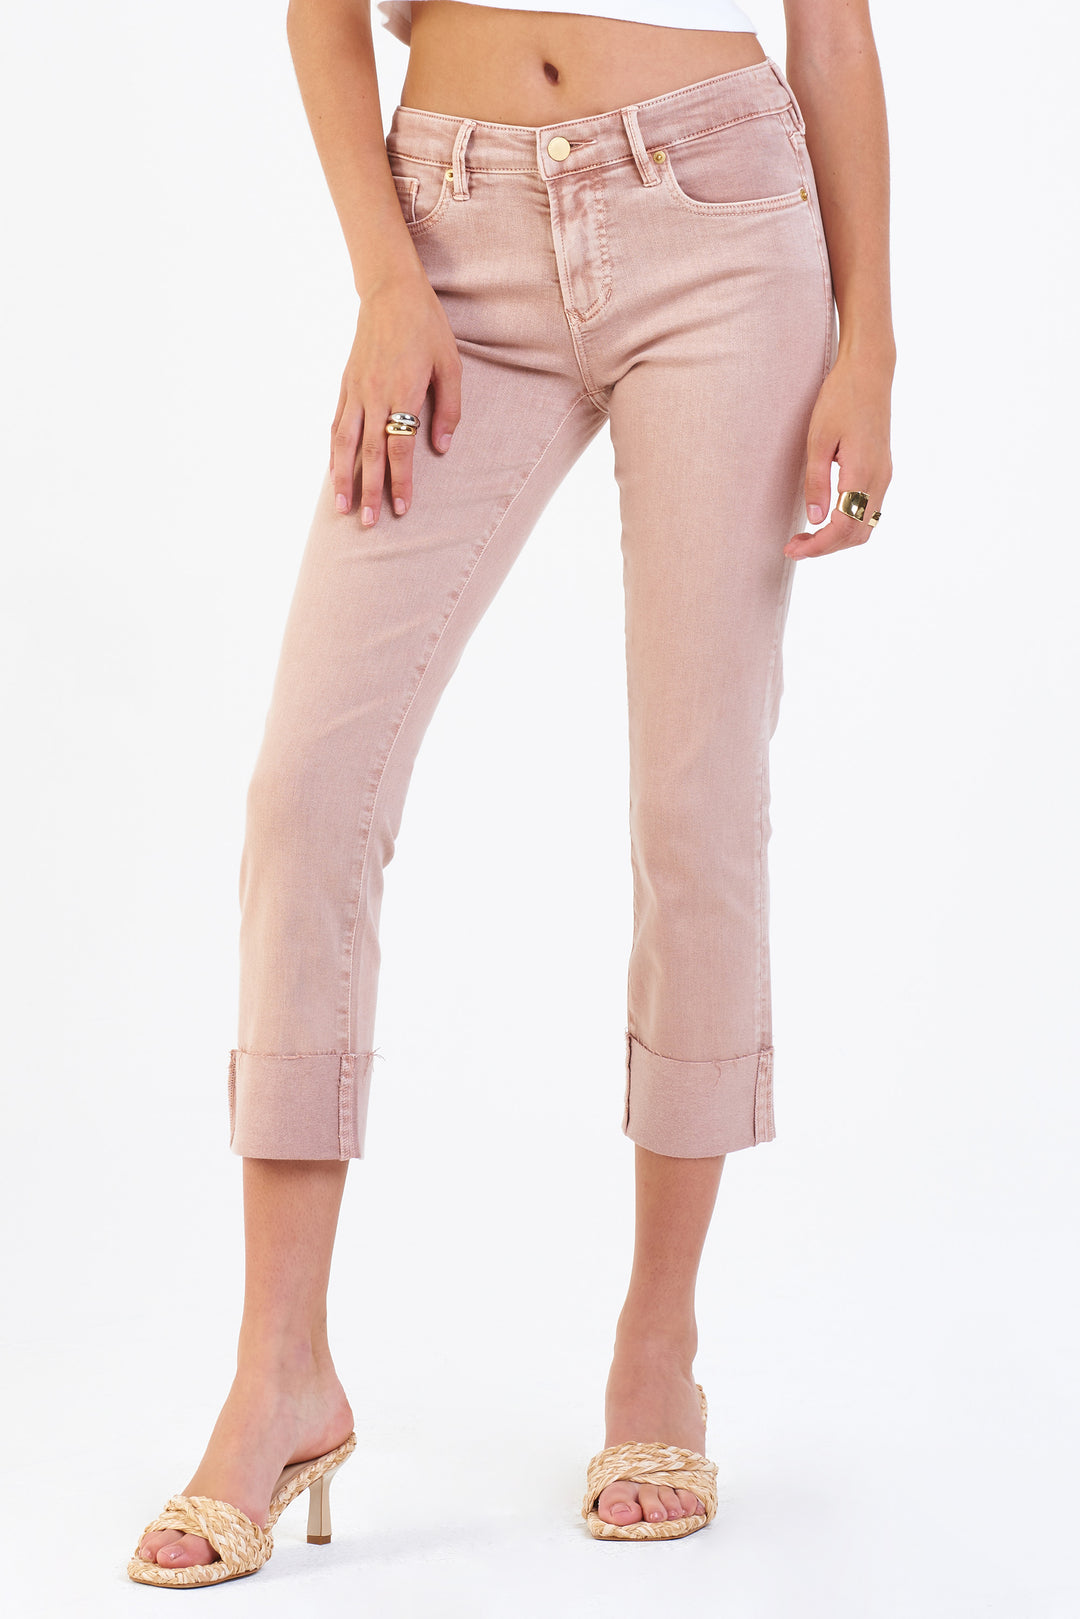 BLAIRE CUFFED STRAIGHT HIGH RISE - ROSE DUST - Kingfisher Road - Online Boutique